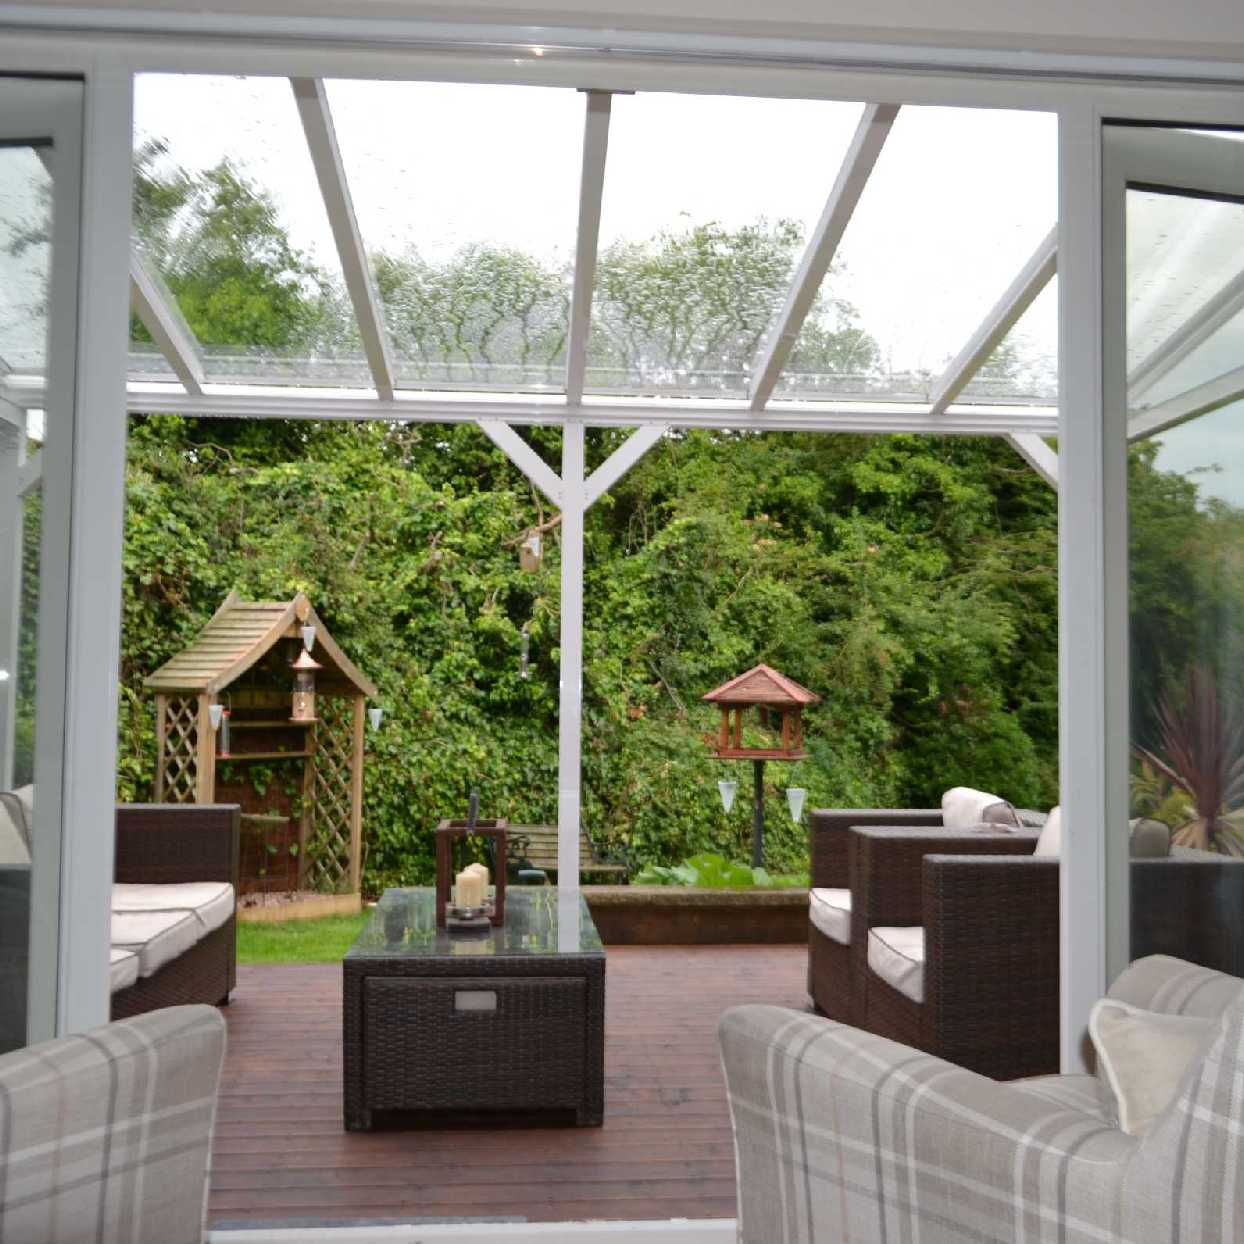 Buy Omega Smart Free-Standing, White MonoPitch Roof Canopy with 6mm Glass Clear Plate Polycarbonate Glazing - 6.3m (W) x 3.5m (P), (8) Supporting Posts online today